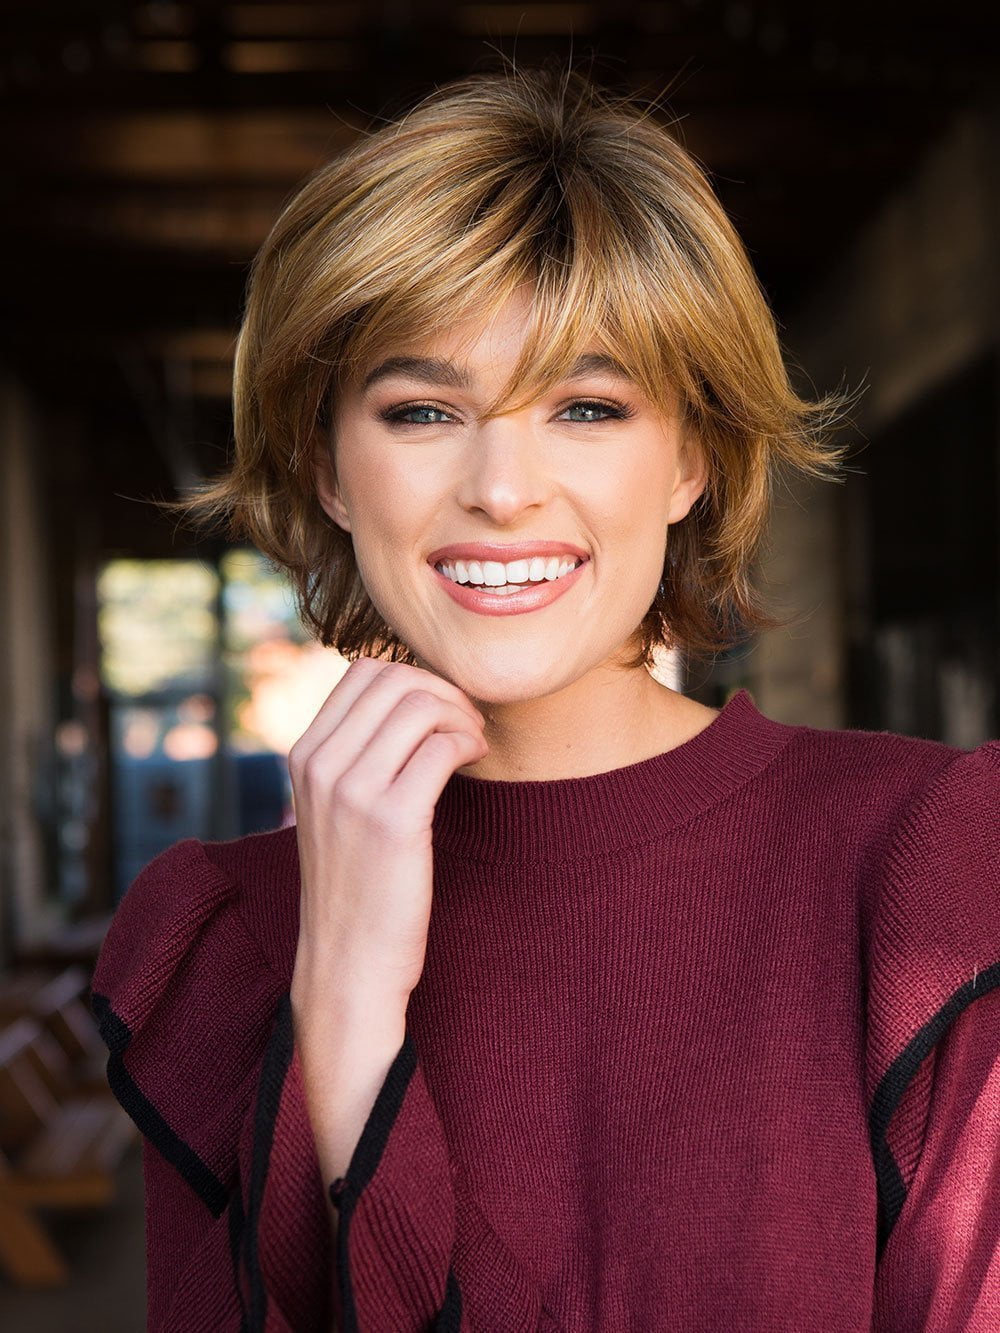 Short and shaggy, the Tamara Wig by Envy has that easy breezy look so many women strive for!